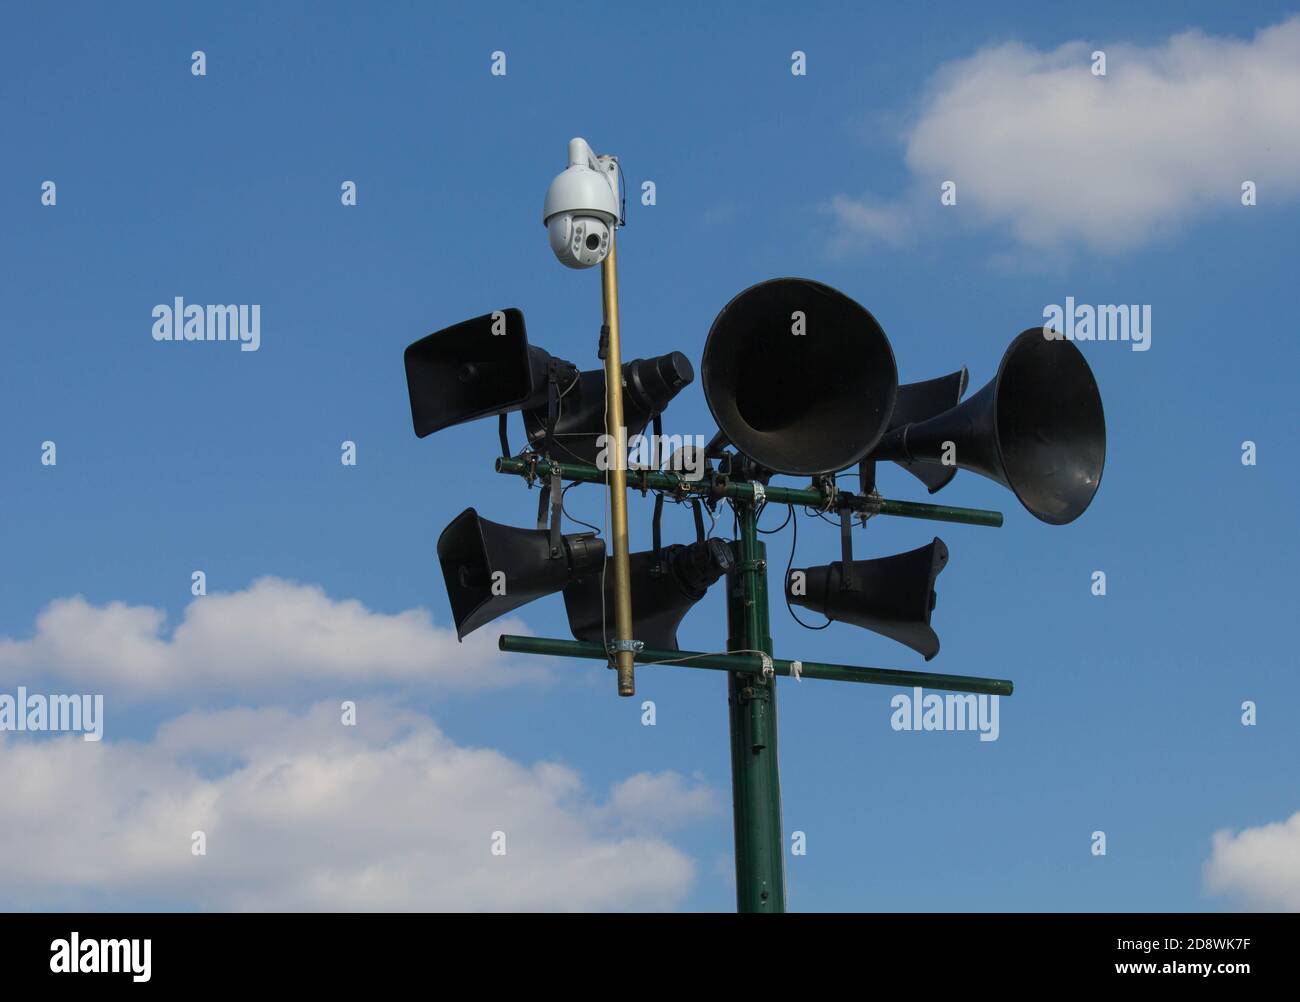 Tannoy system and surveillance camera against a blue sky Stock Photo